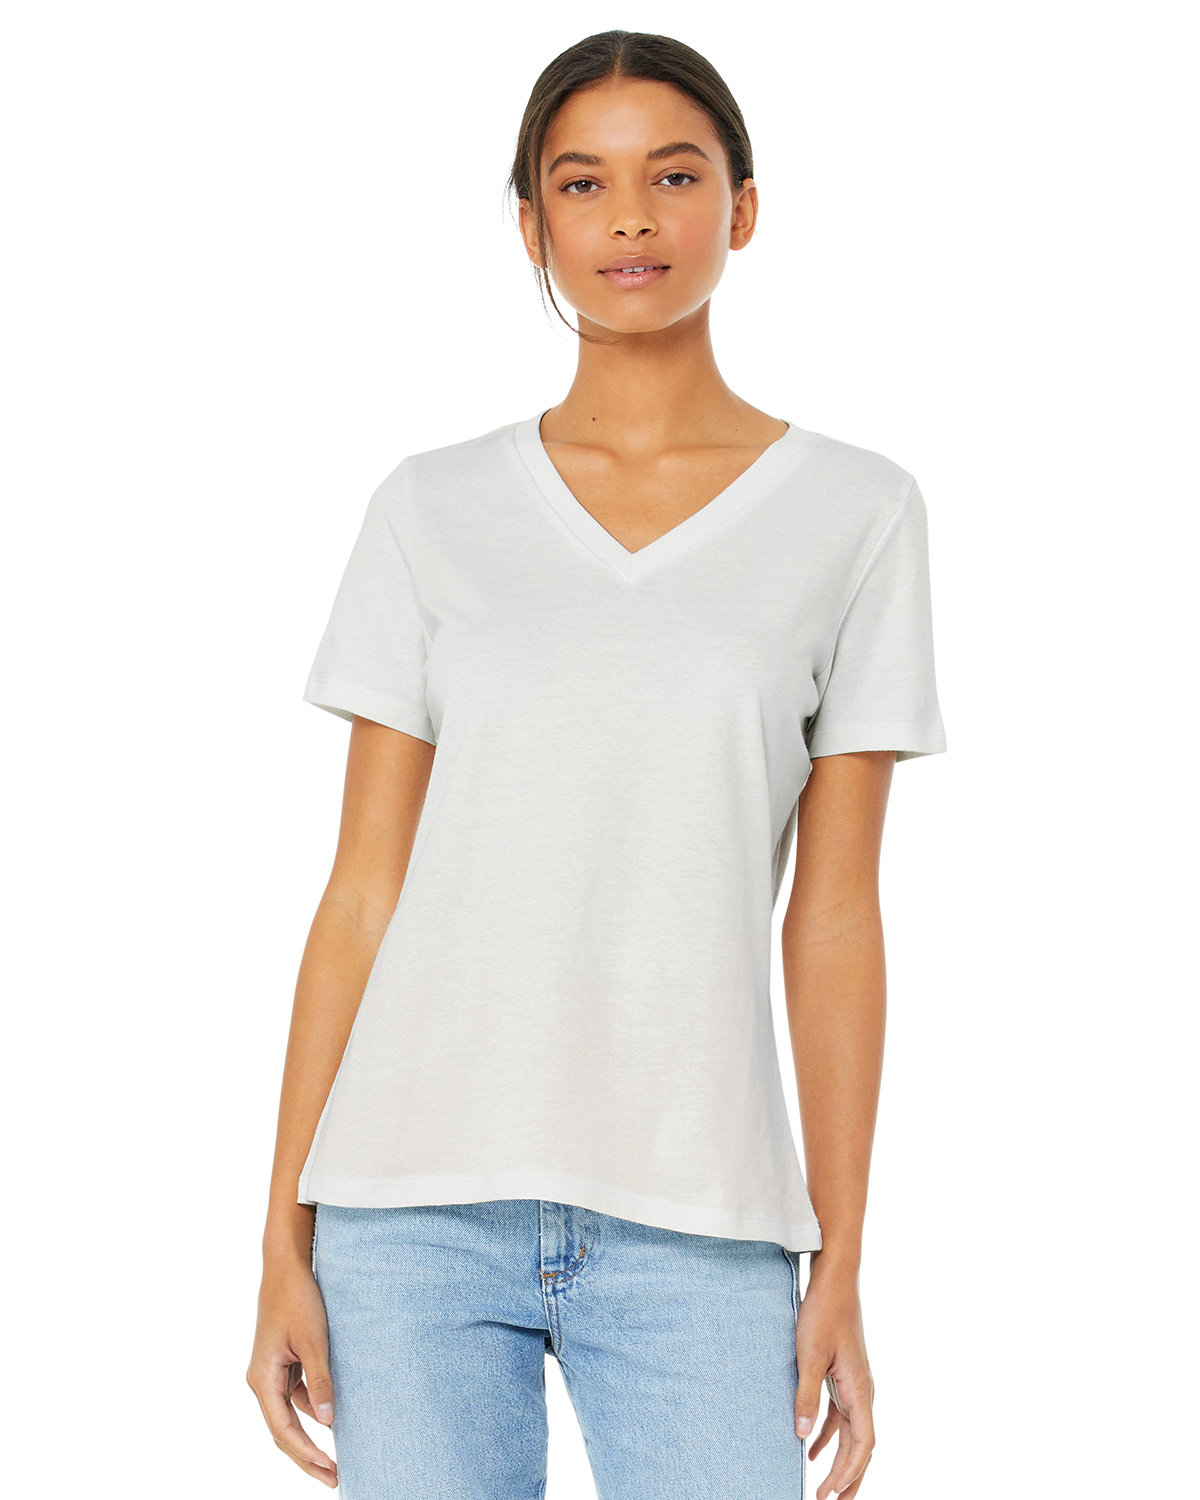 Bella + Canvas Ladies' Relaxed Jersey V-Neck T-Shirt vintage white 